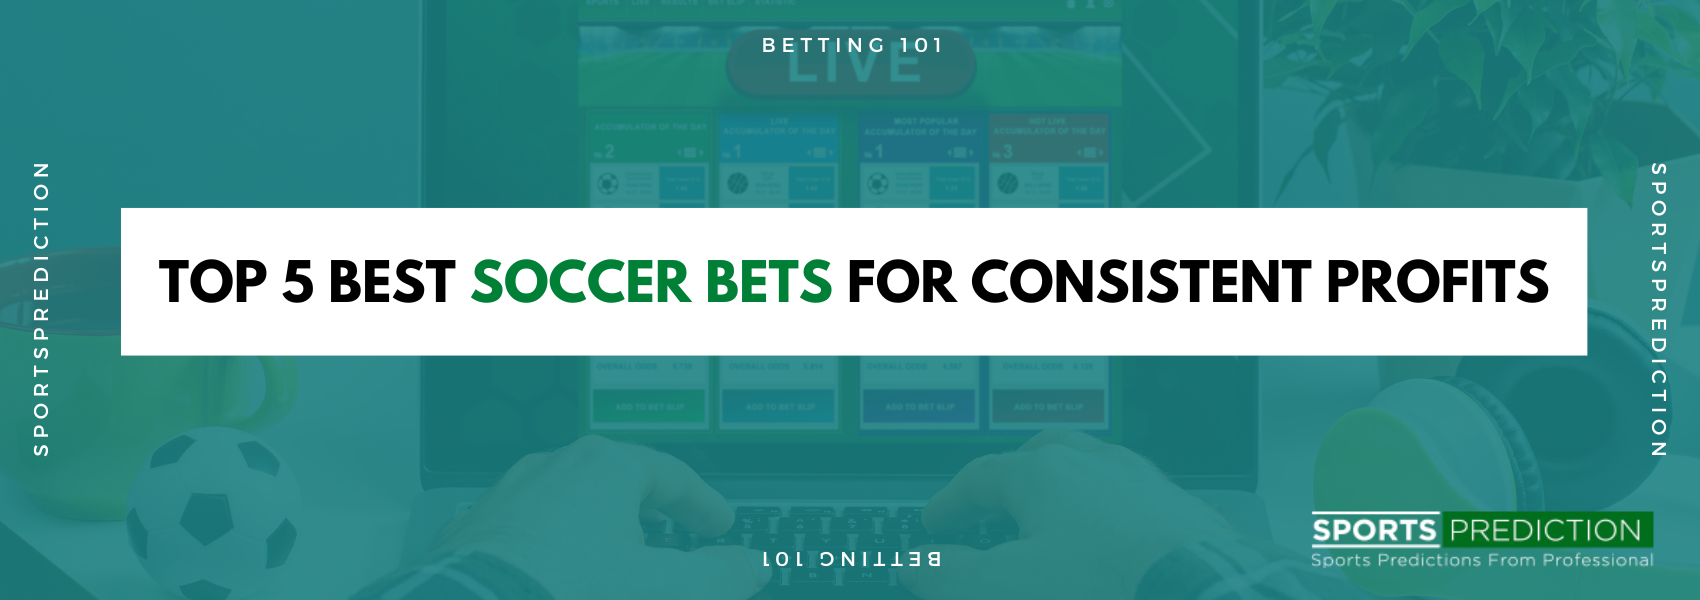 The Top 5 Best Soccer Bets For Consistent Profits